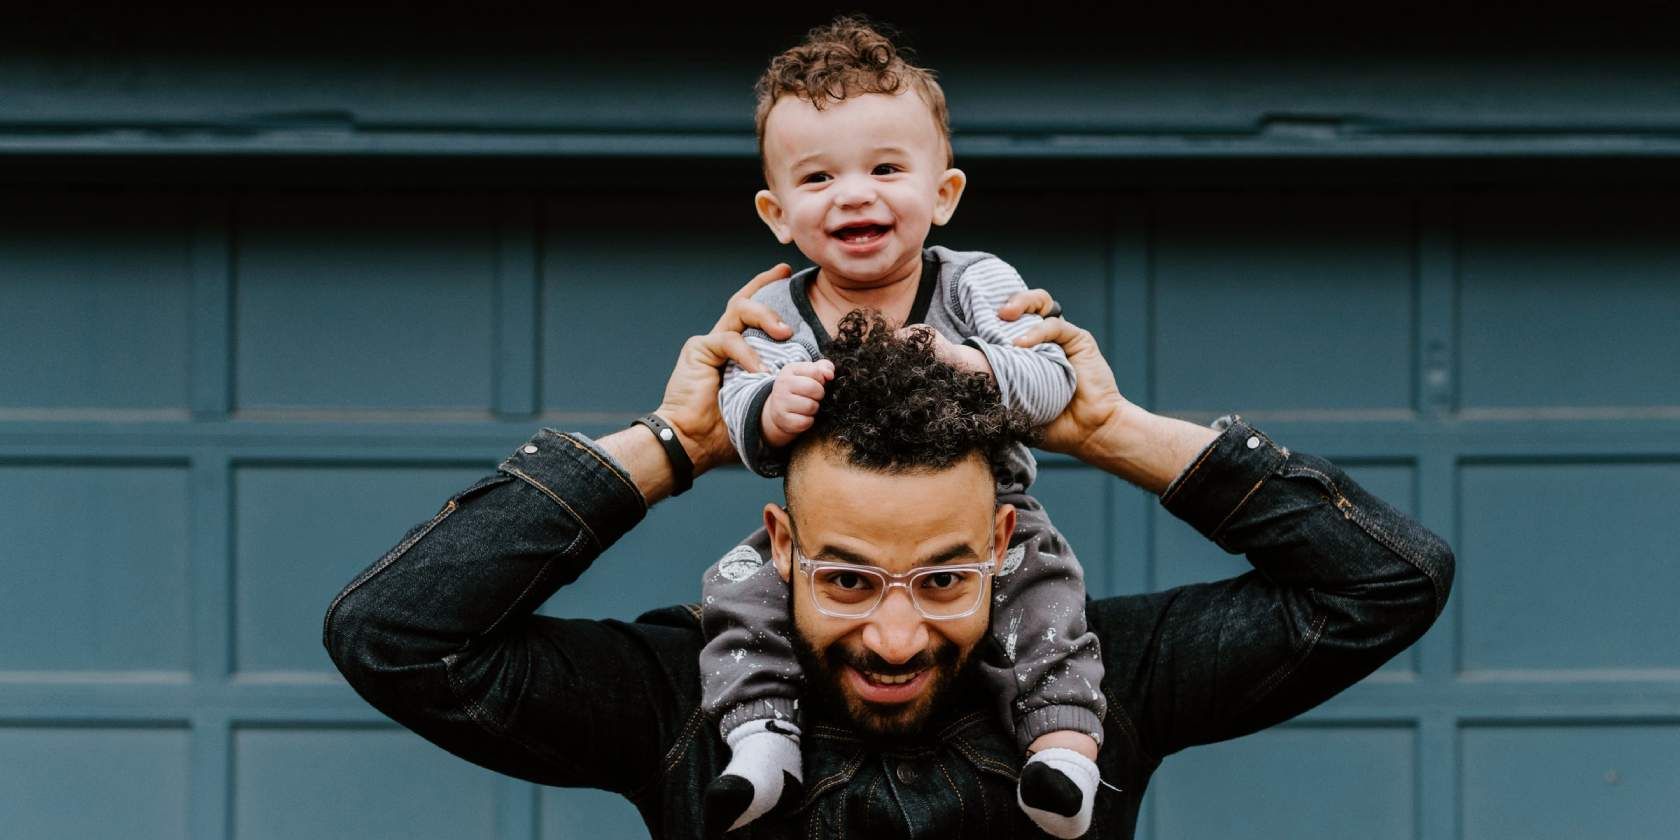 5 Dad Sites for Fathers to Find Parenting Advice and Practical Tips